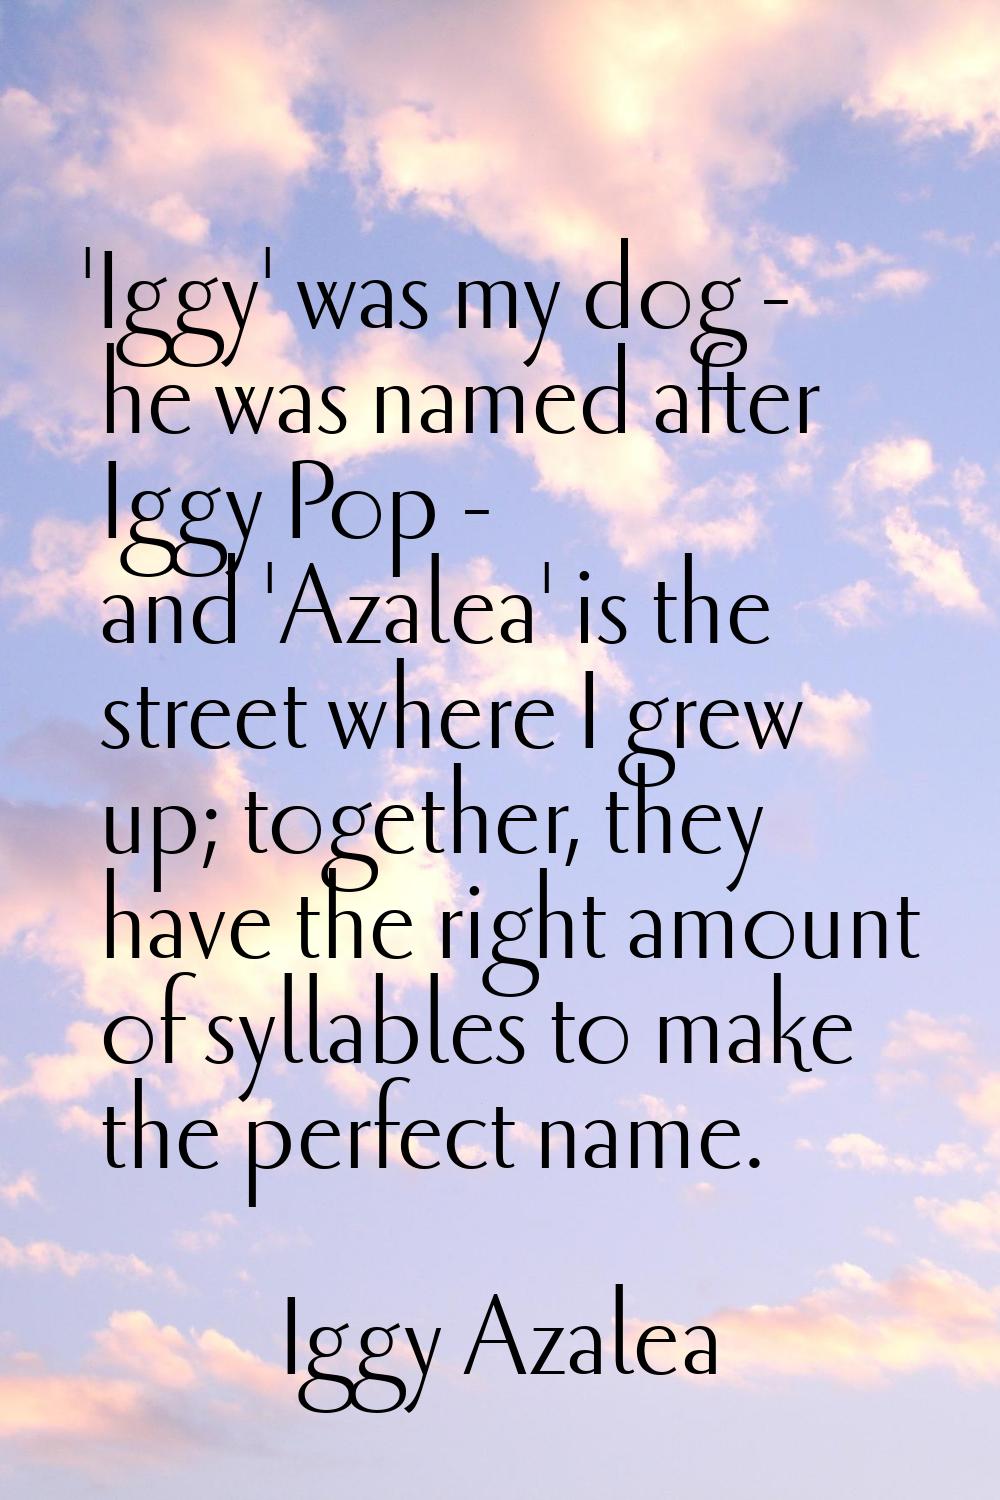 'Iggy' was my dog - he was named after Iggy Pop - and 'Azalea' is the street where I grew up; toget